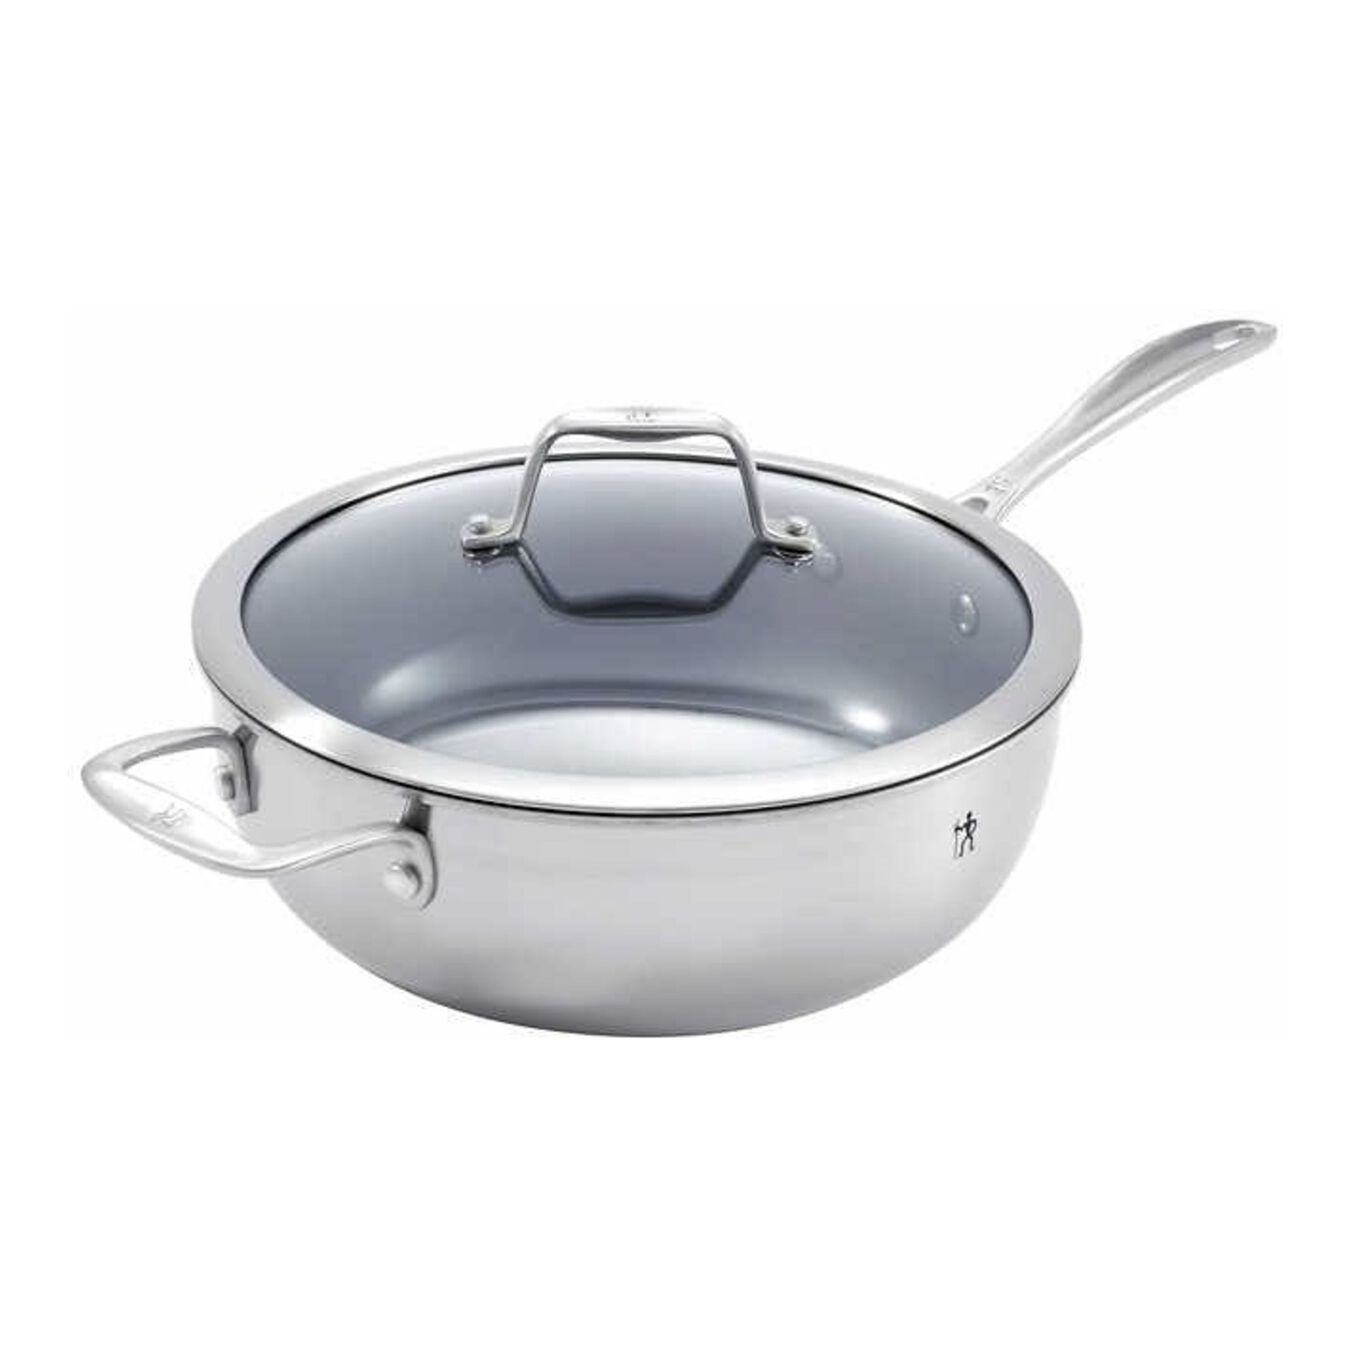  stainless steel Non-Stick Perfect Pan with lid 4.3QT,,large 1